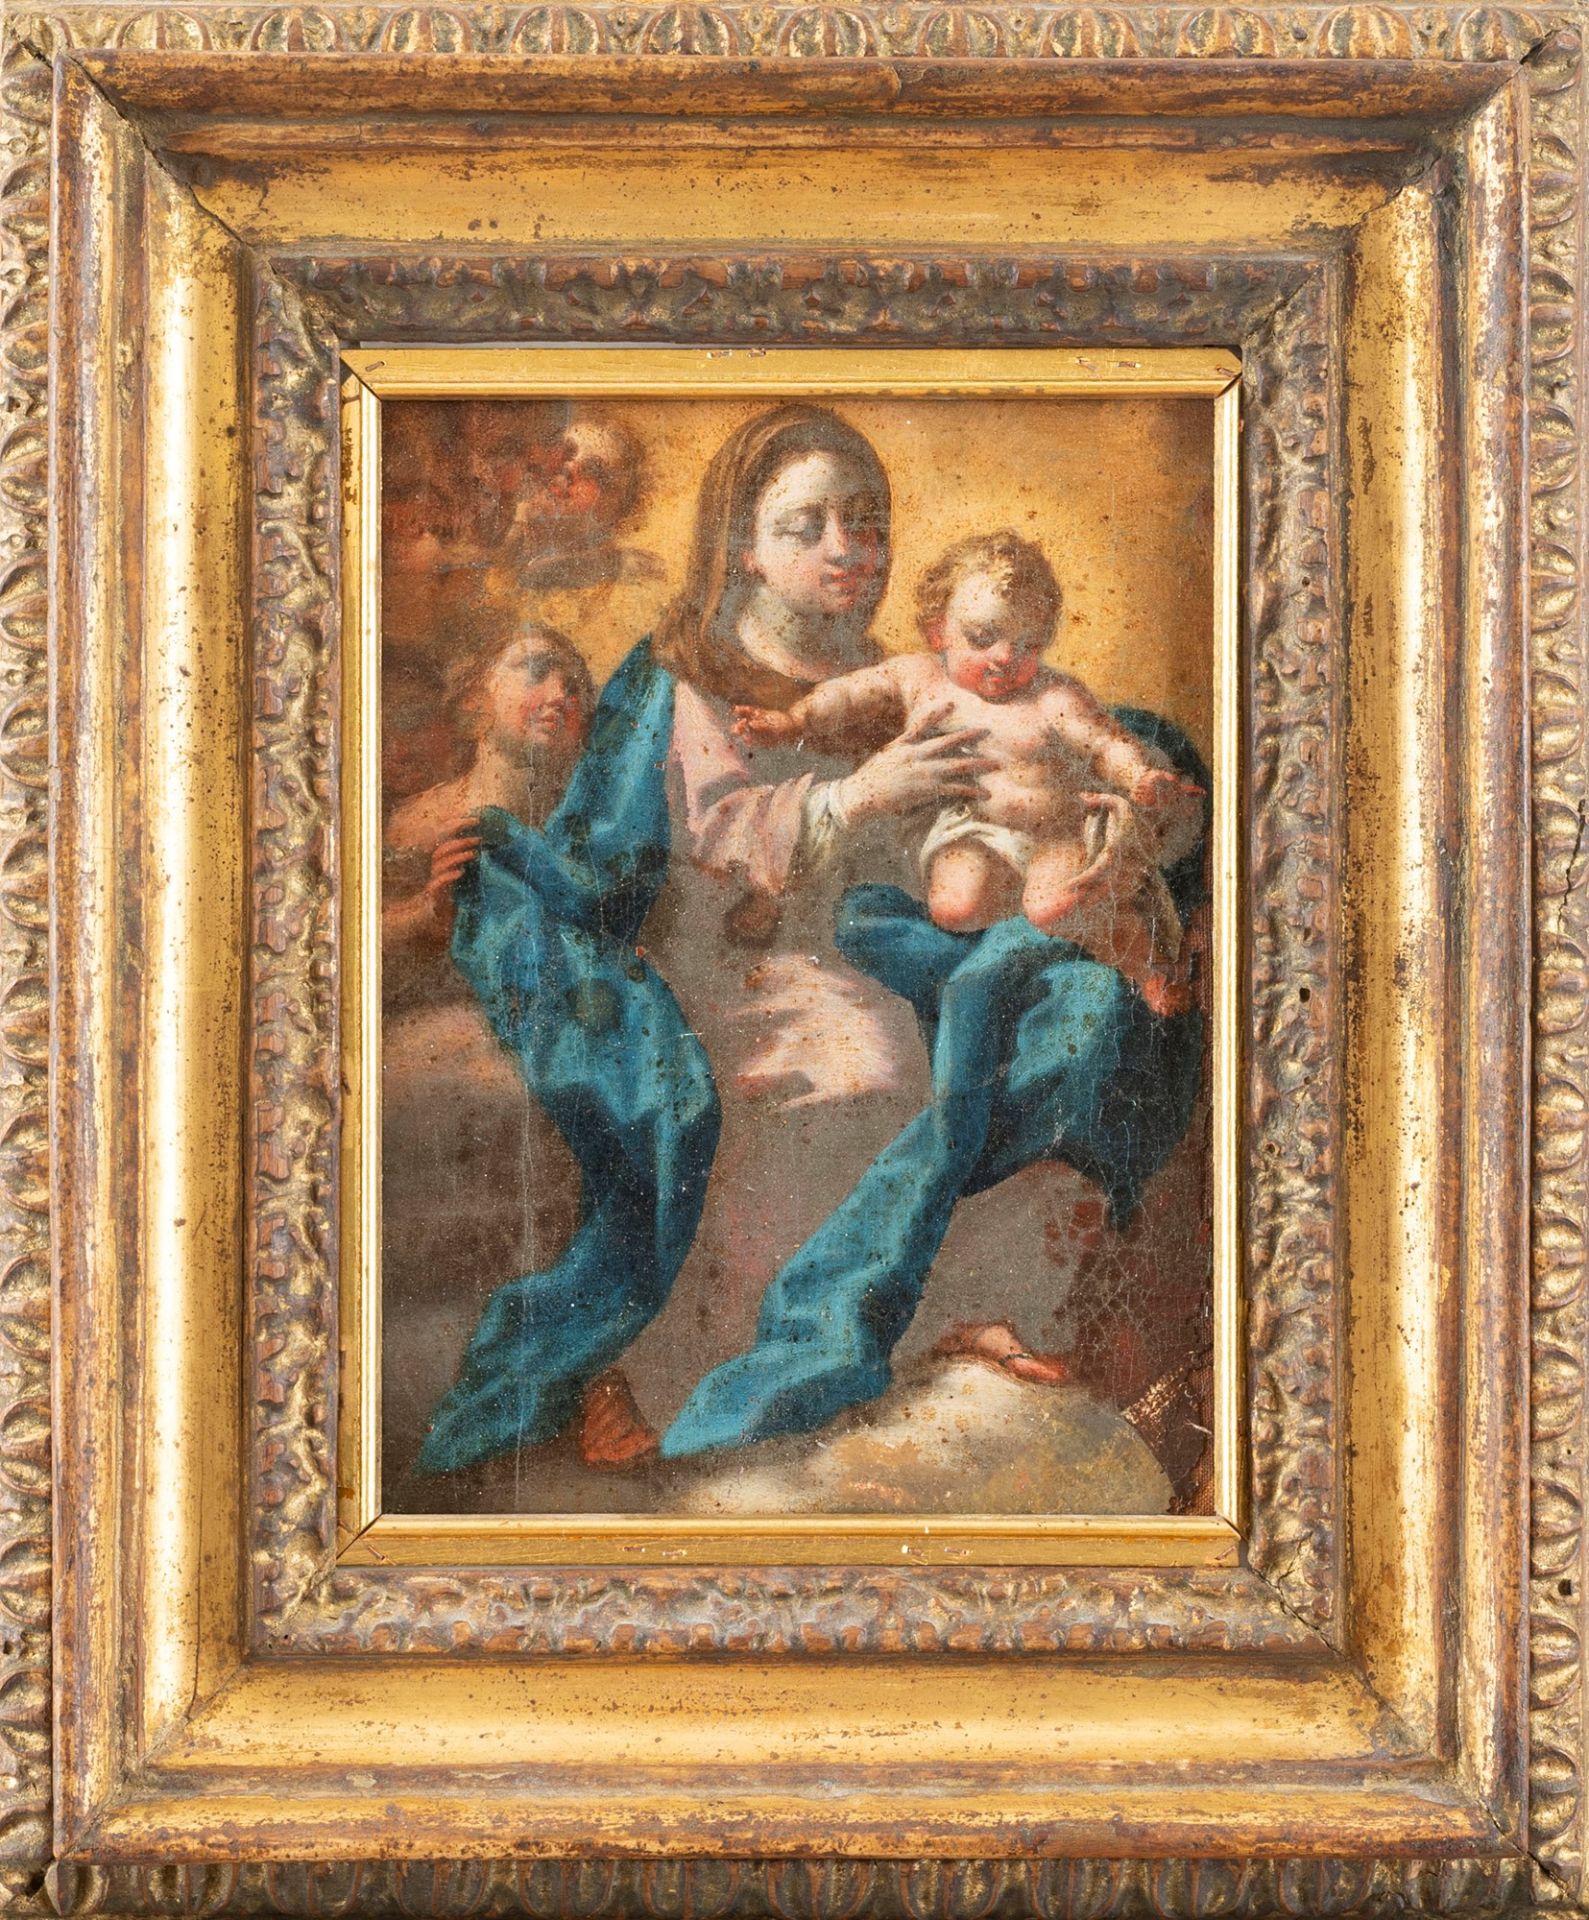 Roman School, XVII century - Madonna with Child and angels - Image 2 of 3